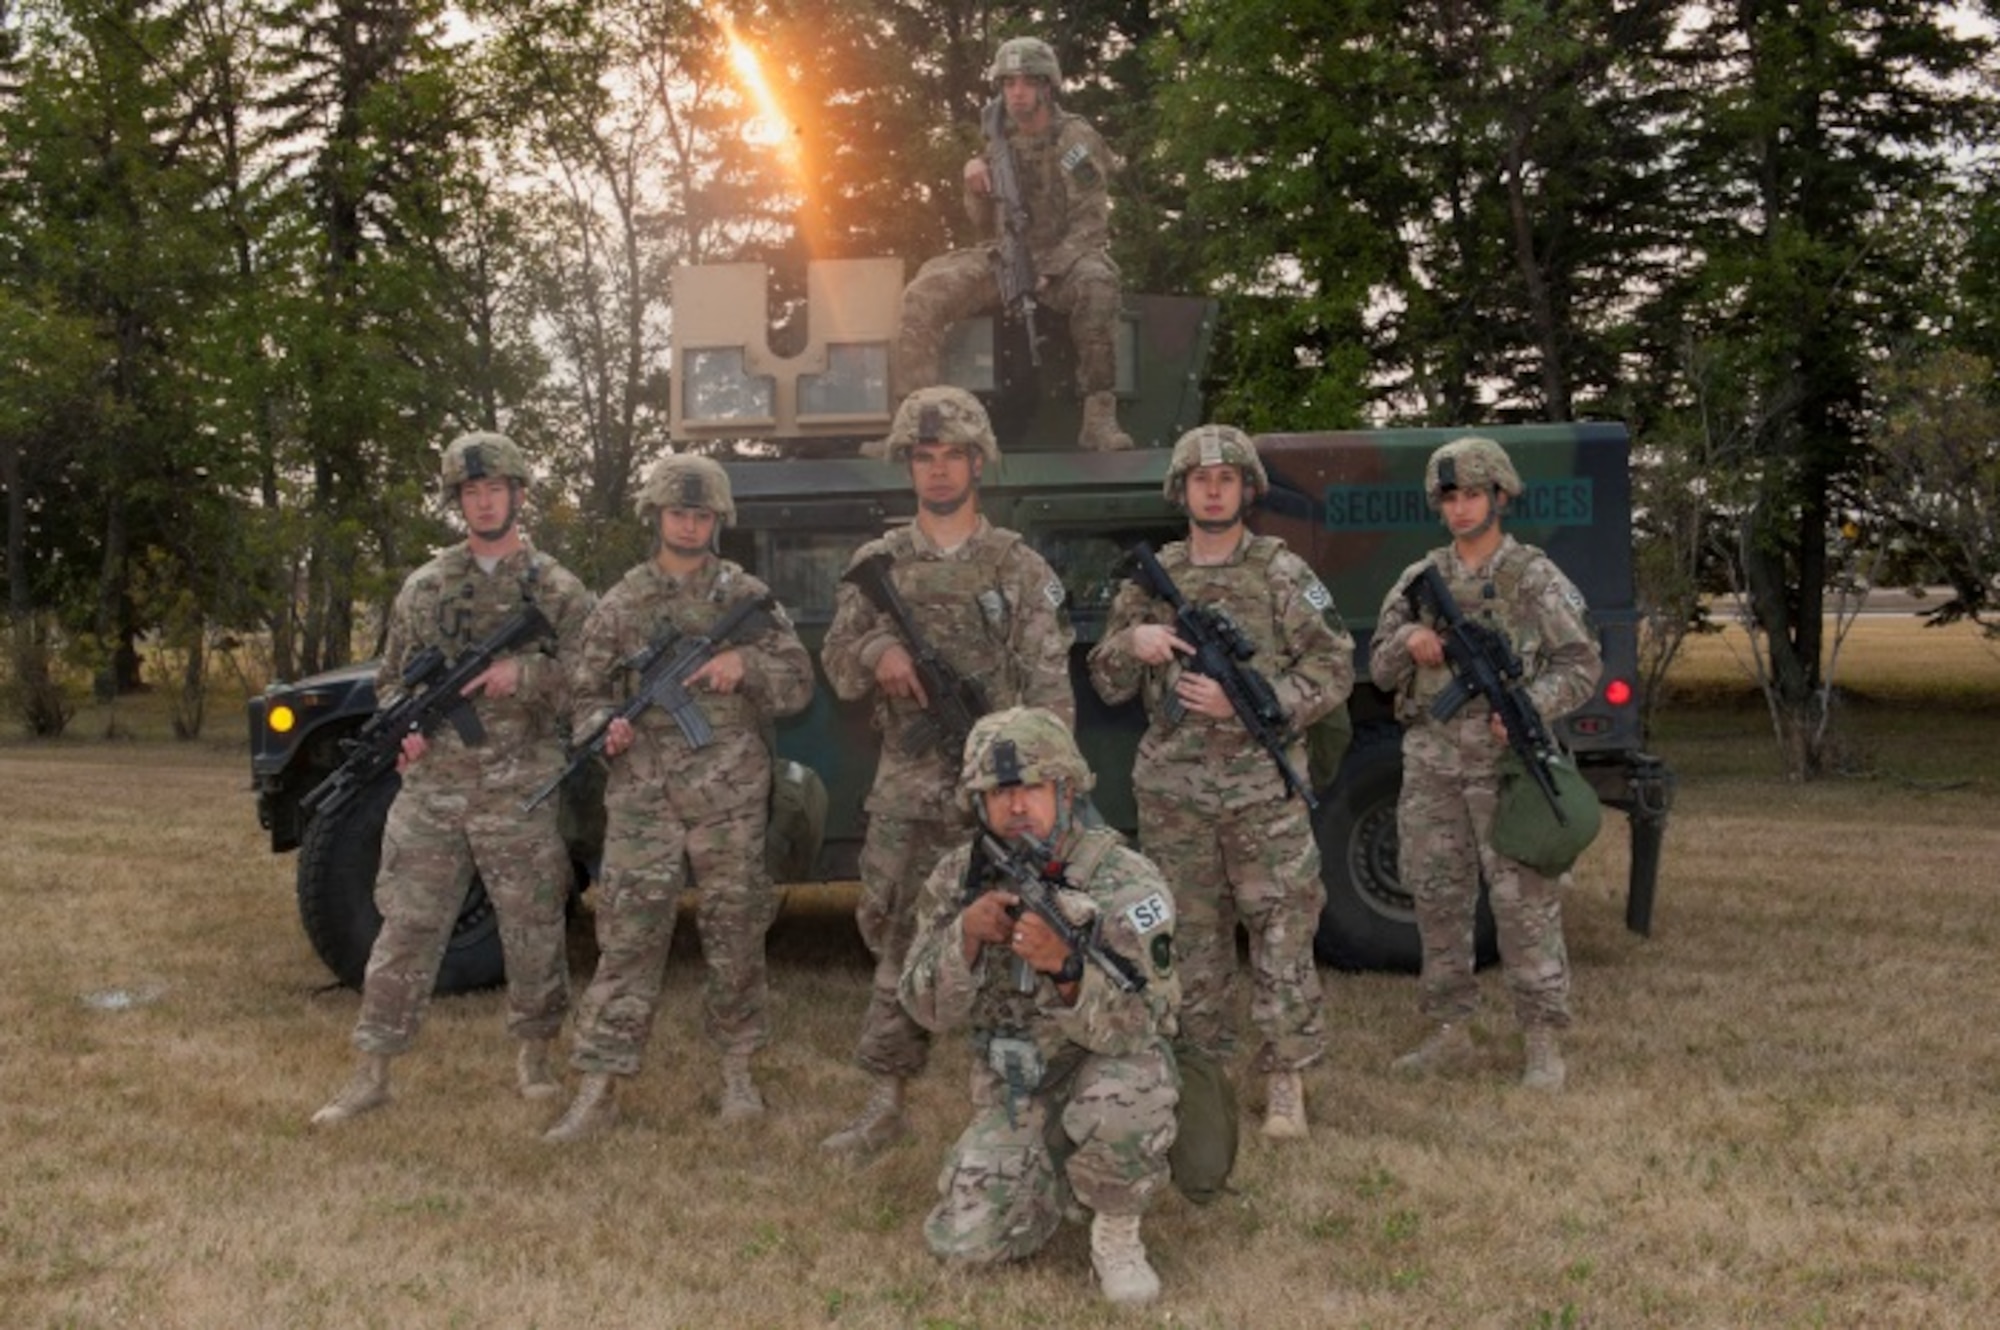 From left to right, Airman 1st Class Jesse Daniel, Airman 1st Class Ethan Fox, Airman 1st Class Jamie Jenks, Airman 1st Class Jade Swain, Senior Airman Jacob Shabenas, Airman 1st Class Ethan Fox on top of the Humvee and Airman 1st Class Amanda Gordon, 5th Security Forces response force members, and Master Sgt. Jason Garo, 5th Security Forces team leader, pose in front of a Humvee at Minot Air Force Base, N.D., Aug. 21, 2015. In 2014, the 5th Security Forces Squadron team failed to win at the Global Strike Challenge, but this year they have been using last year’s defeat to go back and win this year. To train, they have incorporated other squadrons within the wing such as the explosive ordinance disposal squadron and the medical squadron to help with their training as well as push their physical and mental limits. (U.S. Air Force photo/Airman 1st Class Christian Sullivan)